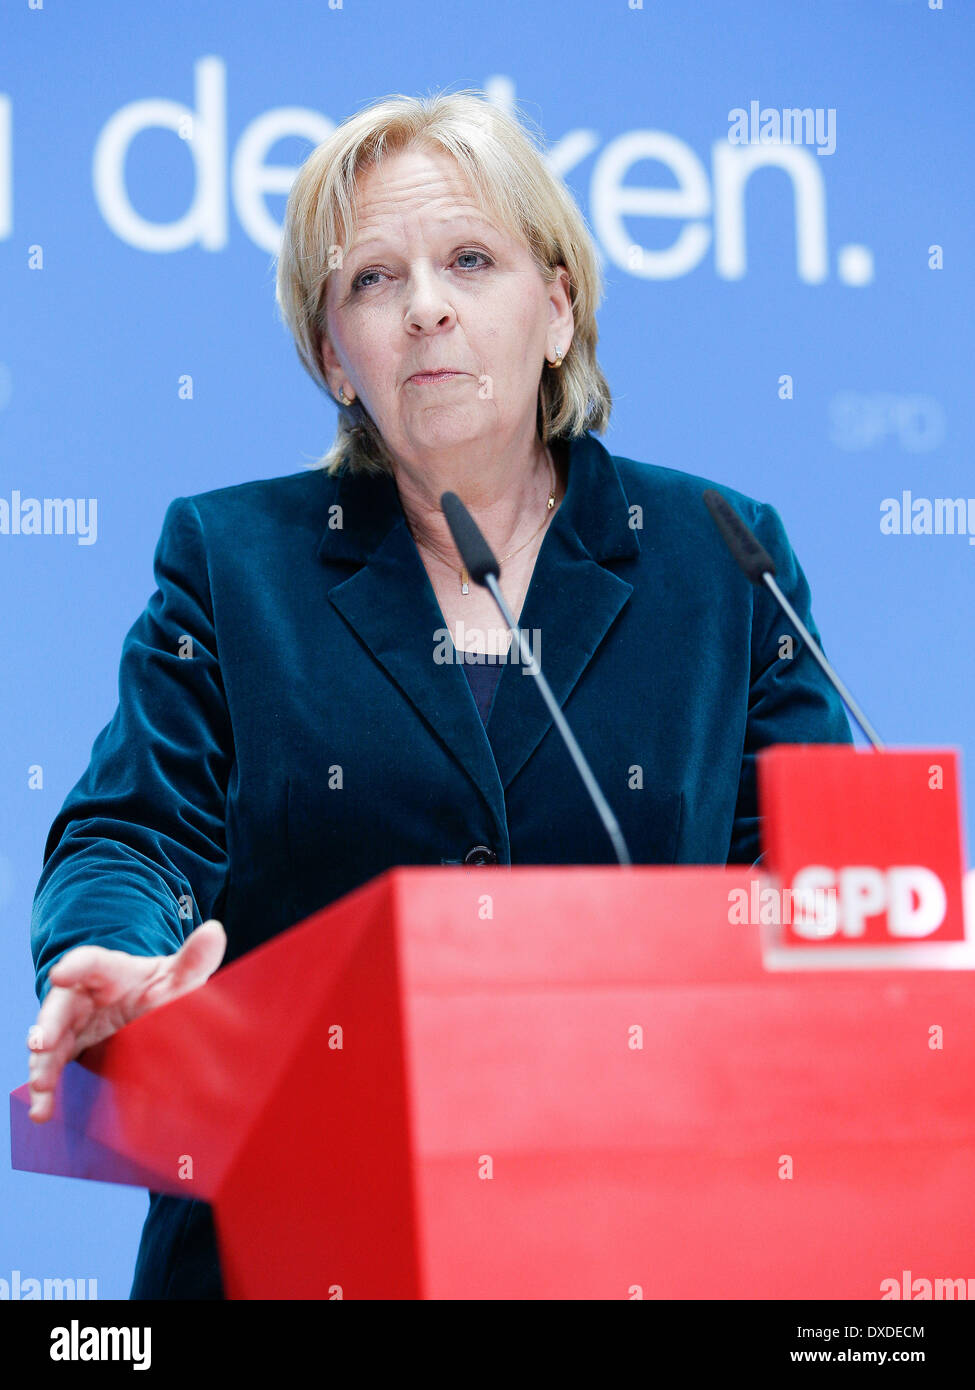 Berlin, Germany. 24th Mar, 2014. Statement on energy policy with Sigmar Gabriel, SPD Chief and Miniter of Economy, and Hannelore Kraft, Minister-President of North Rhine-Westphalia, and Malu Dreyer, Minister-President of Rhineland-Palatinate, and the Deputy Prime Minister of Baden-WÃƒÂ¼rttemberg Nils Schmid at Willy-Brandt-Haus in Berlin./Picture: Hannelore Kraft, Minister-President of North Rhine-Westphali. Credit:  Reynaldo Paganelli/NurPhoto/ZUMAPRESS.com/Alamy Live News Stock Photo